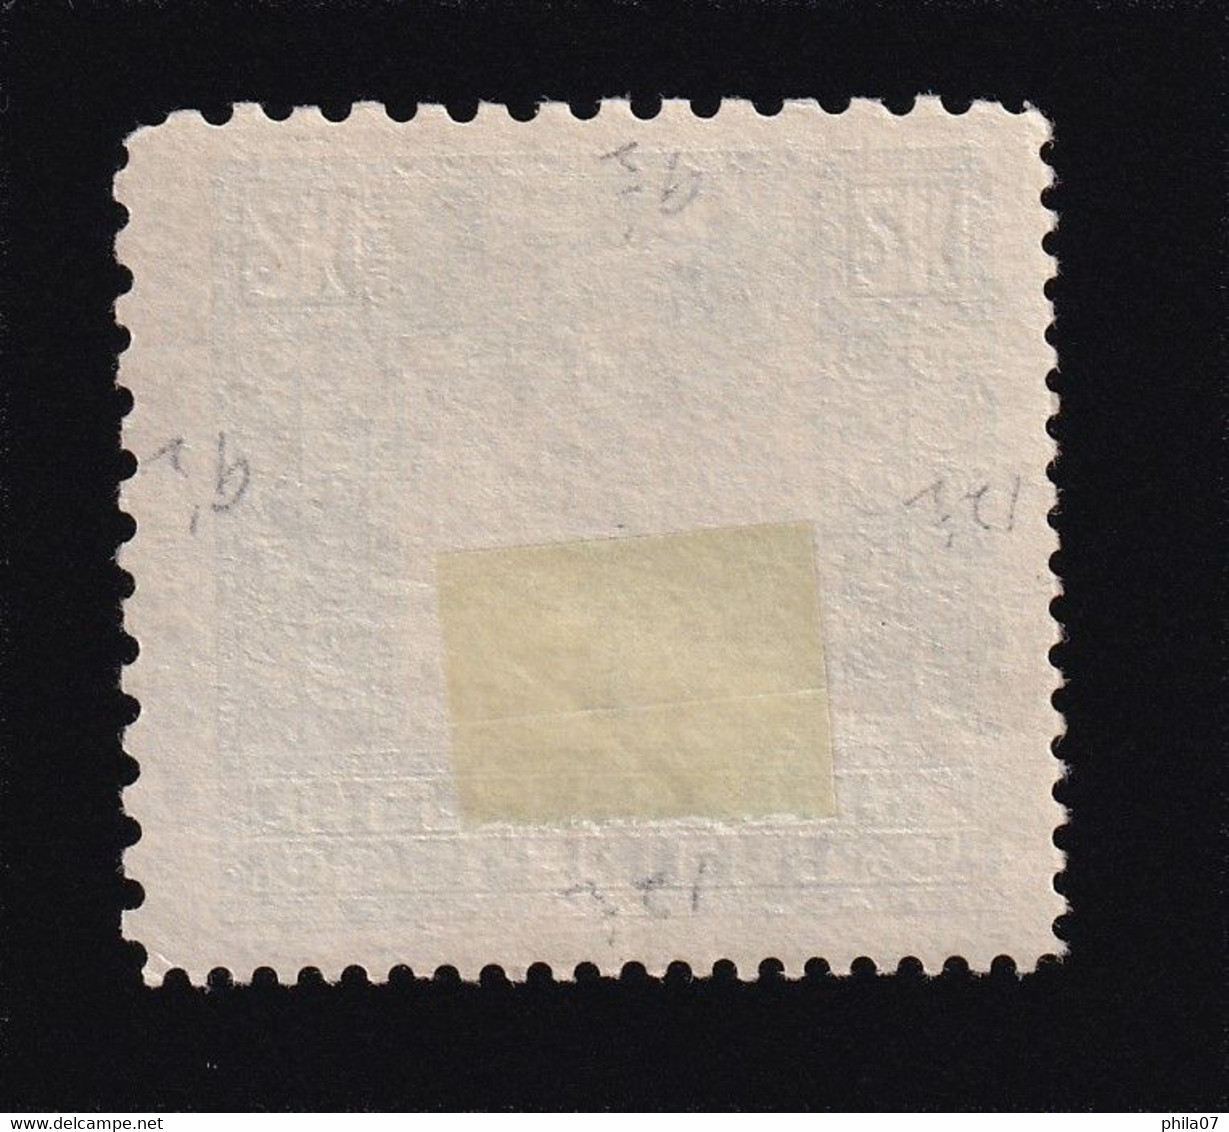 BOSNIA AND HERZEGOVINA - Landscape Stamp, 2 Krune, With Mixed Perforation Different Position 9 ½:9½:12½:12½, MH - Bosnie-Herzegovine